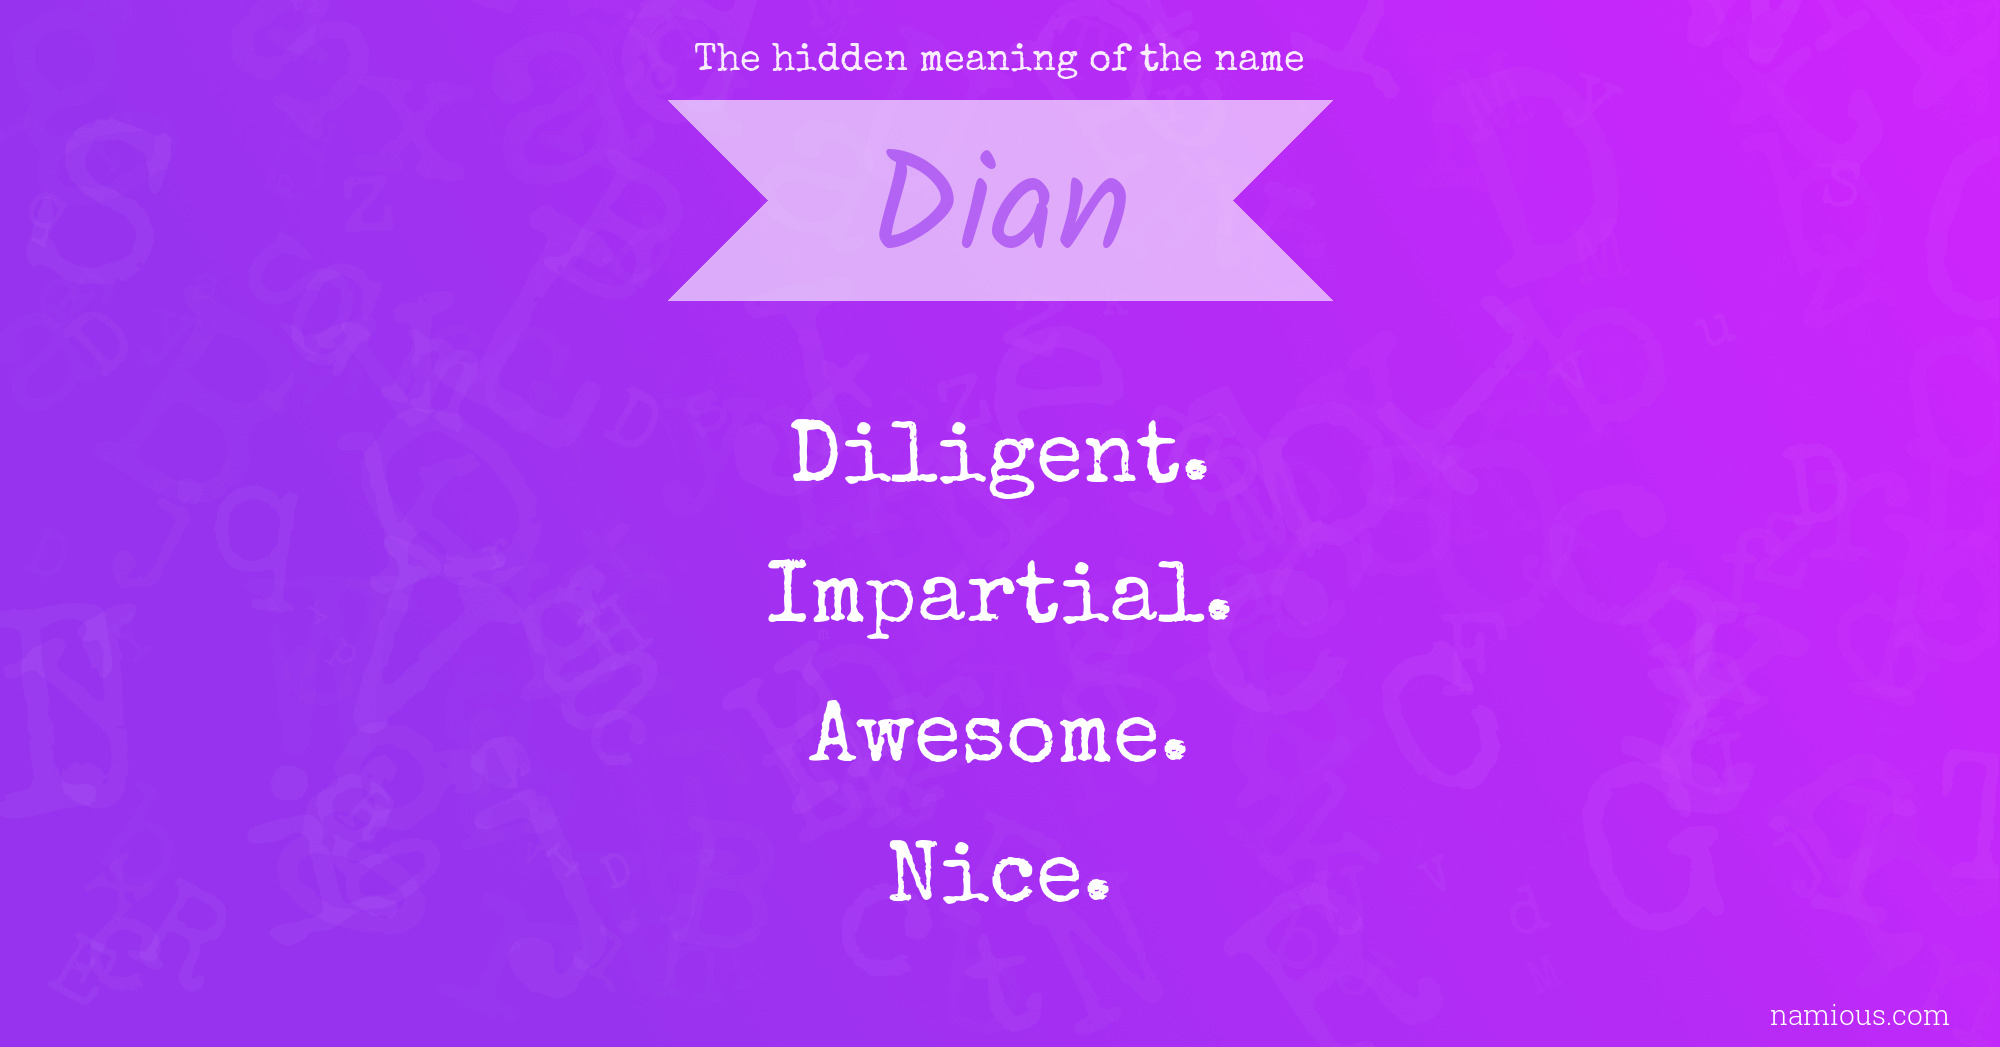 The hidden meaning of the name Dian